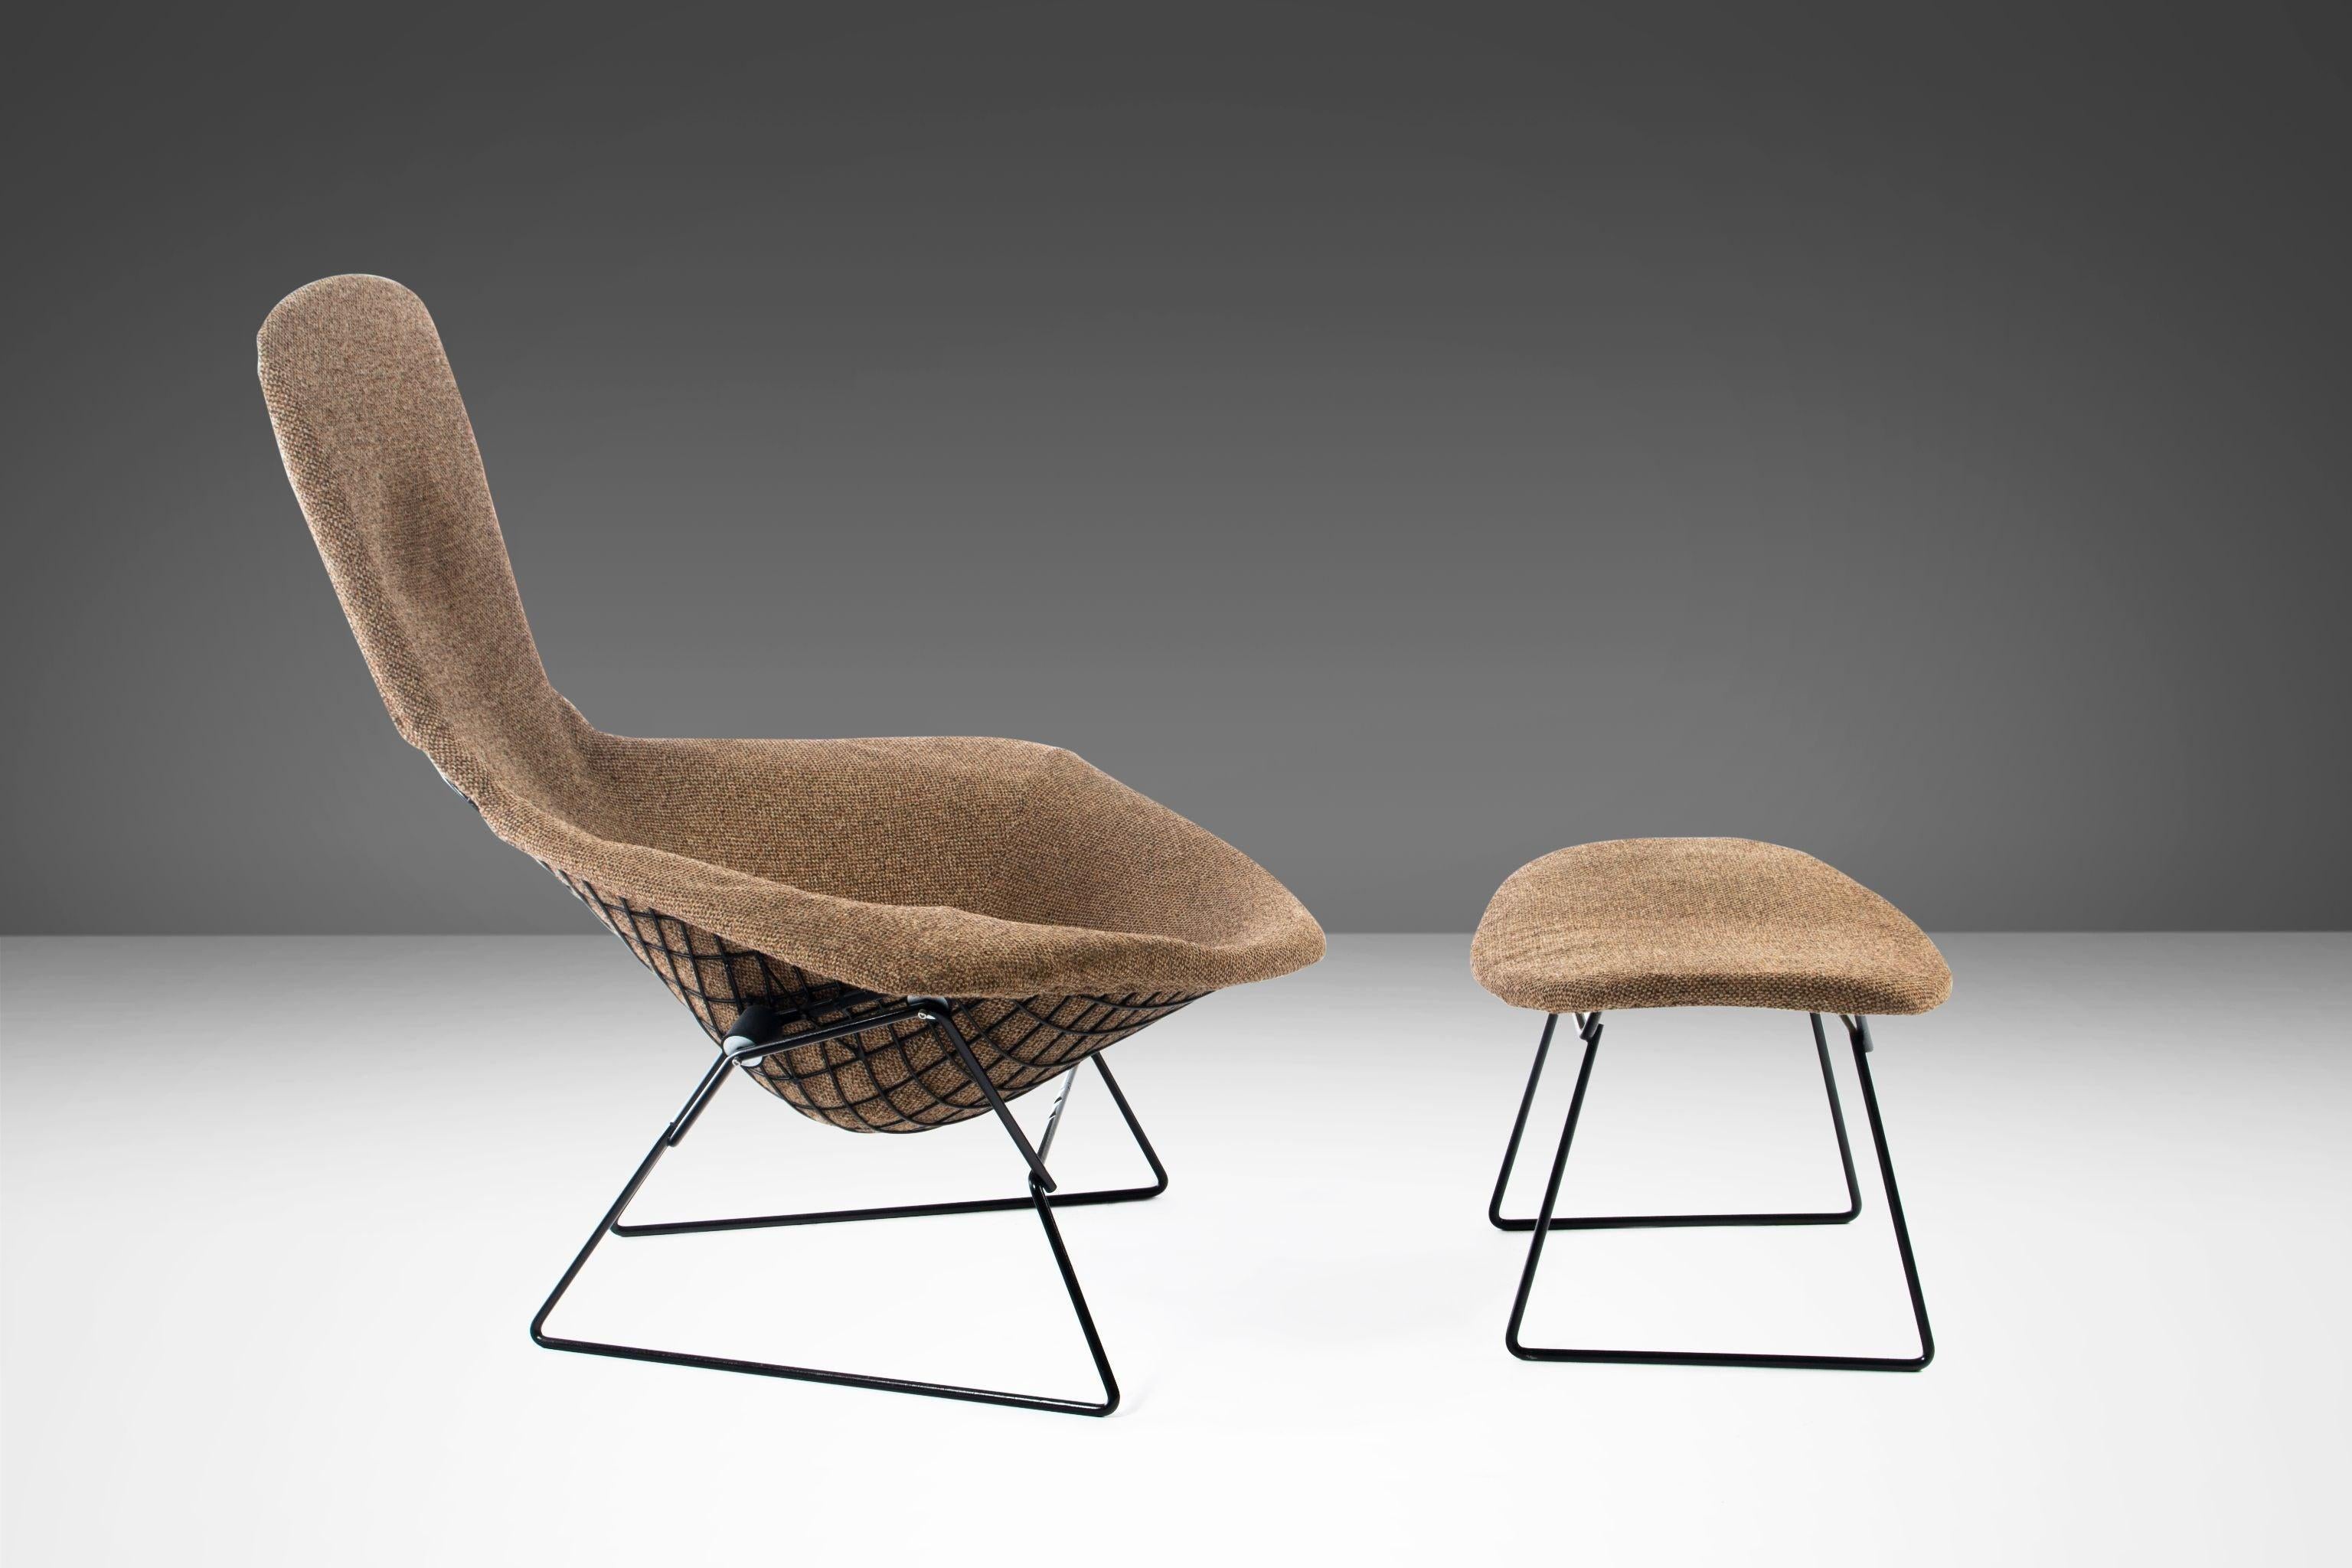 Mid-20th Century Authentic Bird Lounge Chair and Ottoman by Harry Bertoia for Knoll, USA, 1960s For Sale